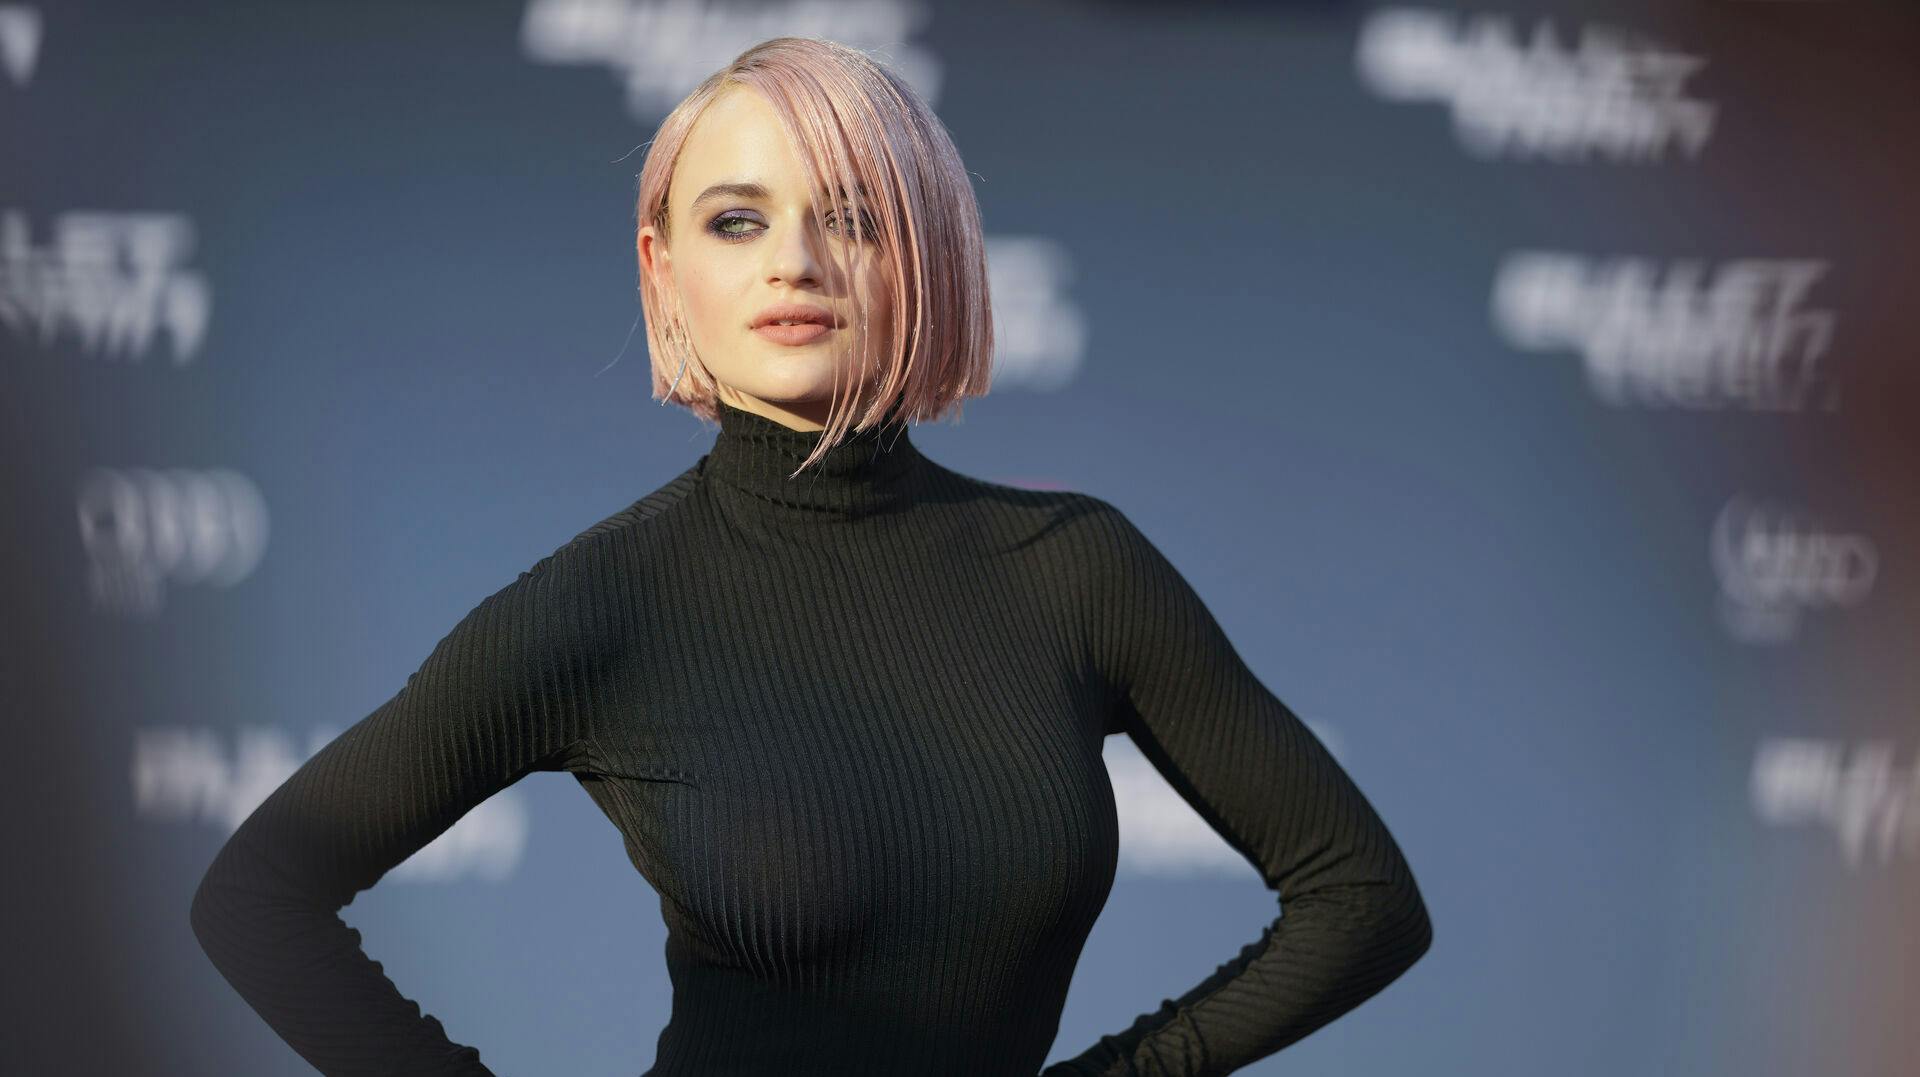 Actress Joey King walks the red carpet for the movie "Bullet Train" at the Zoopalast in Berlin, Germany, Tuesday, July 19, 2022. (AP Photo/Markus Schreiber)